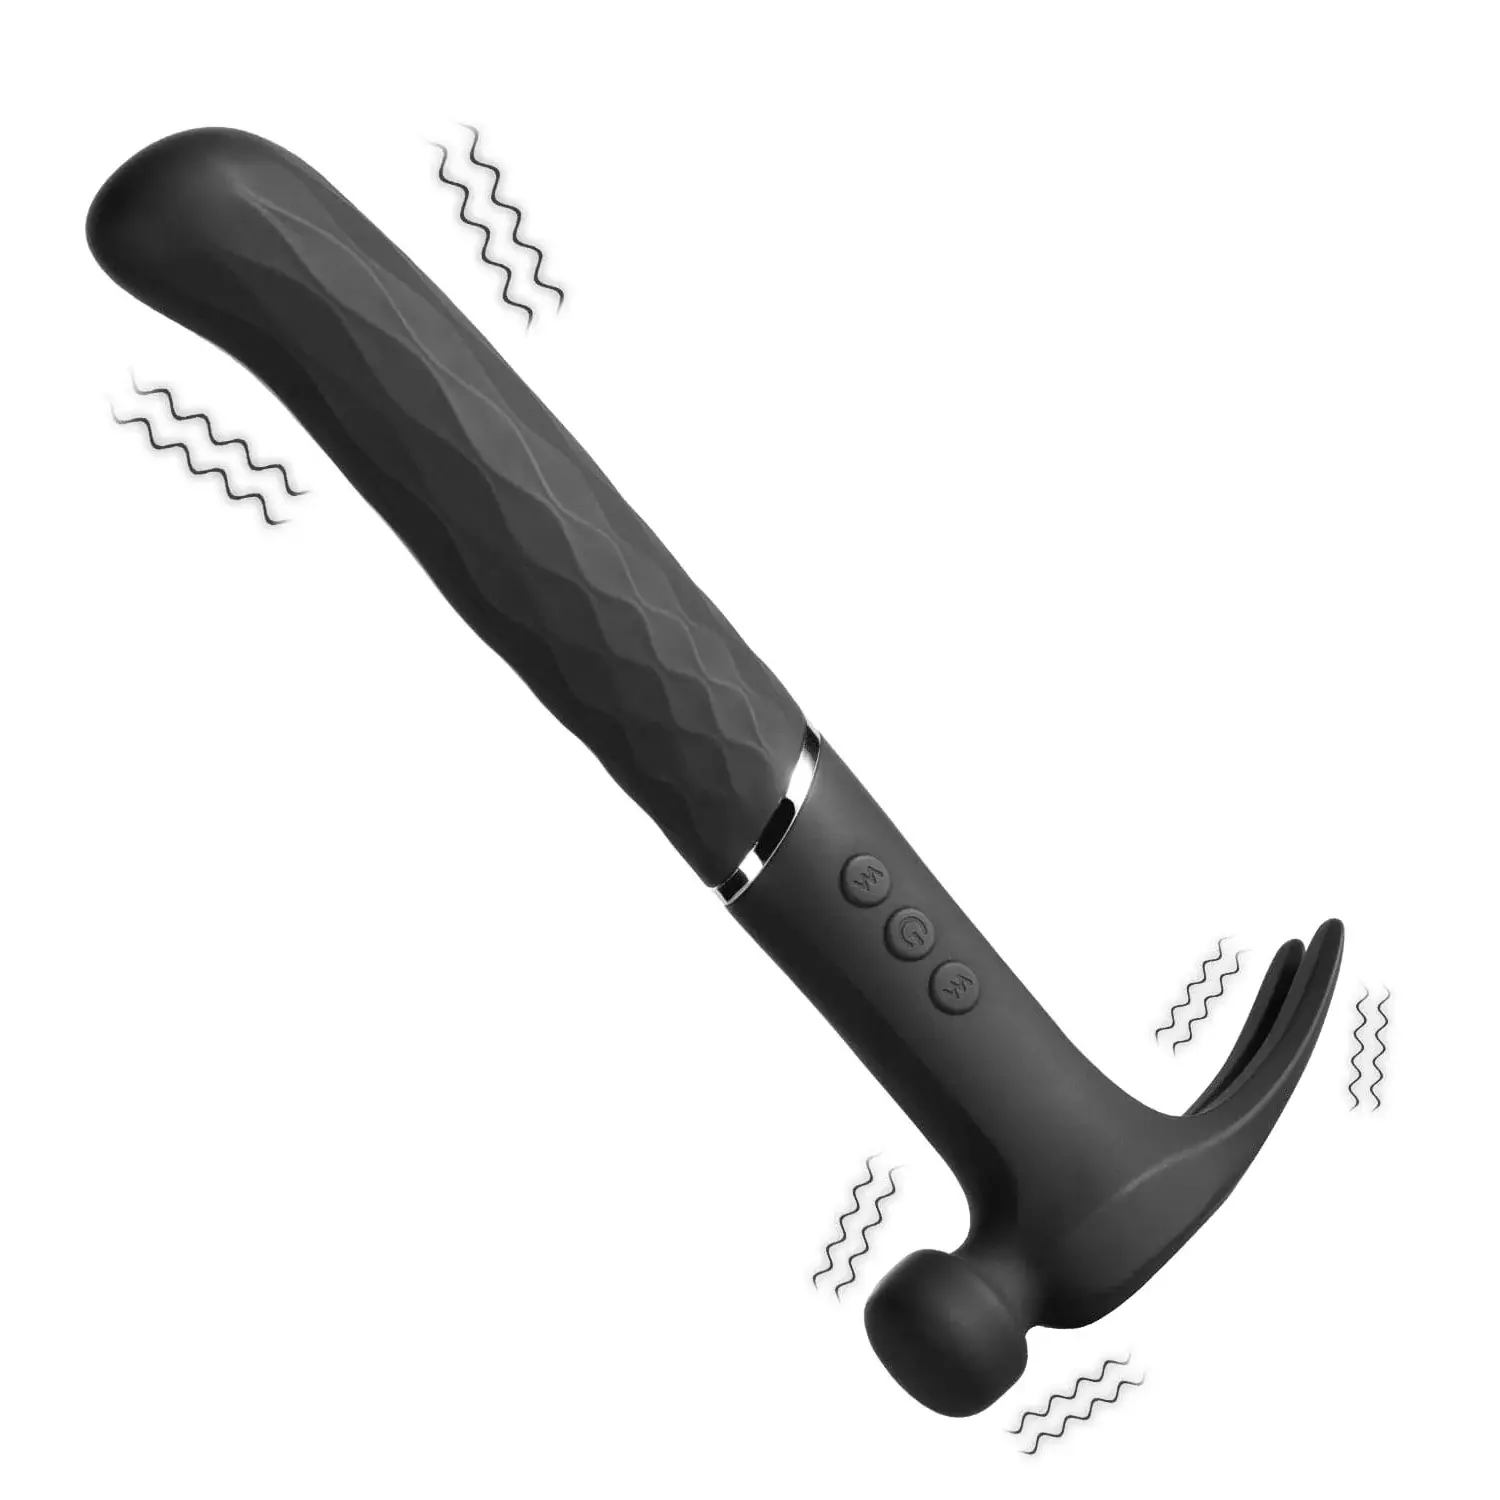 Bad-ass Hammer – Multi-Function G-spot and Clit Vibrator Box